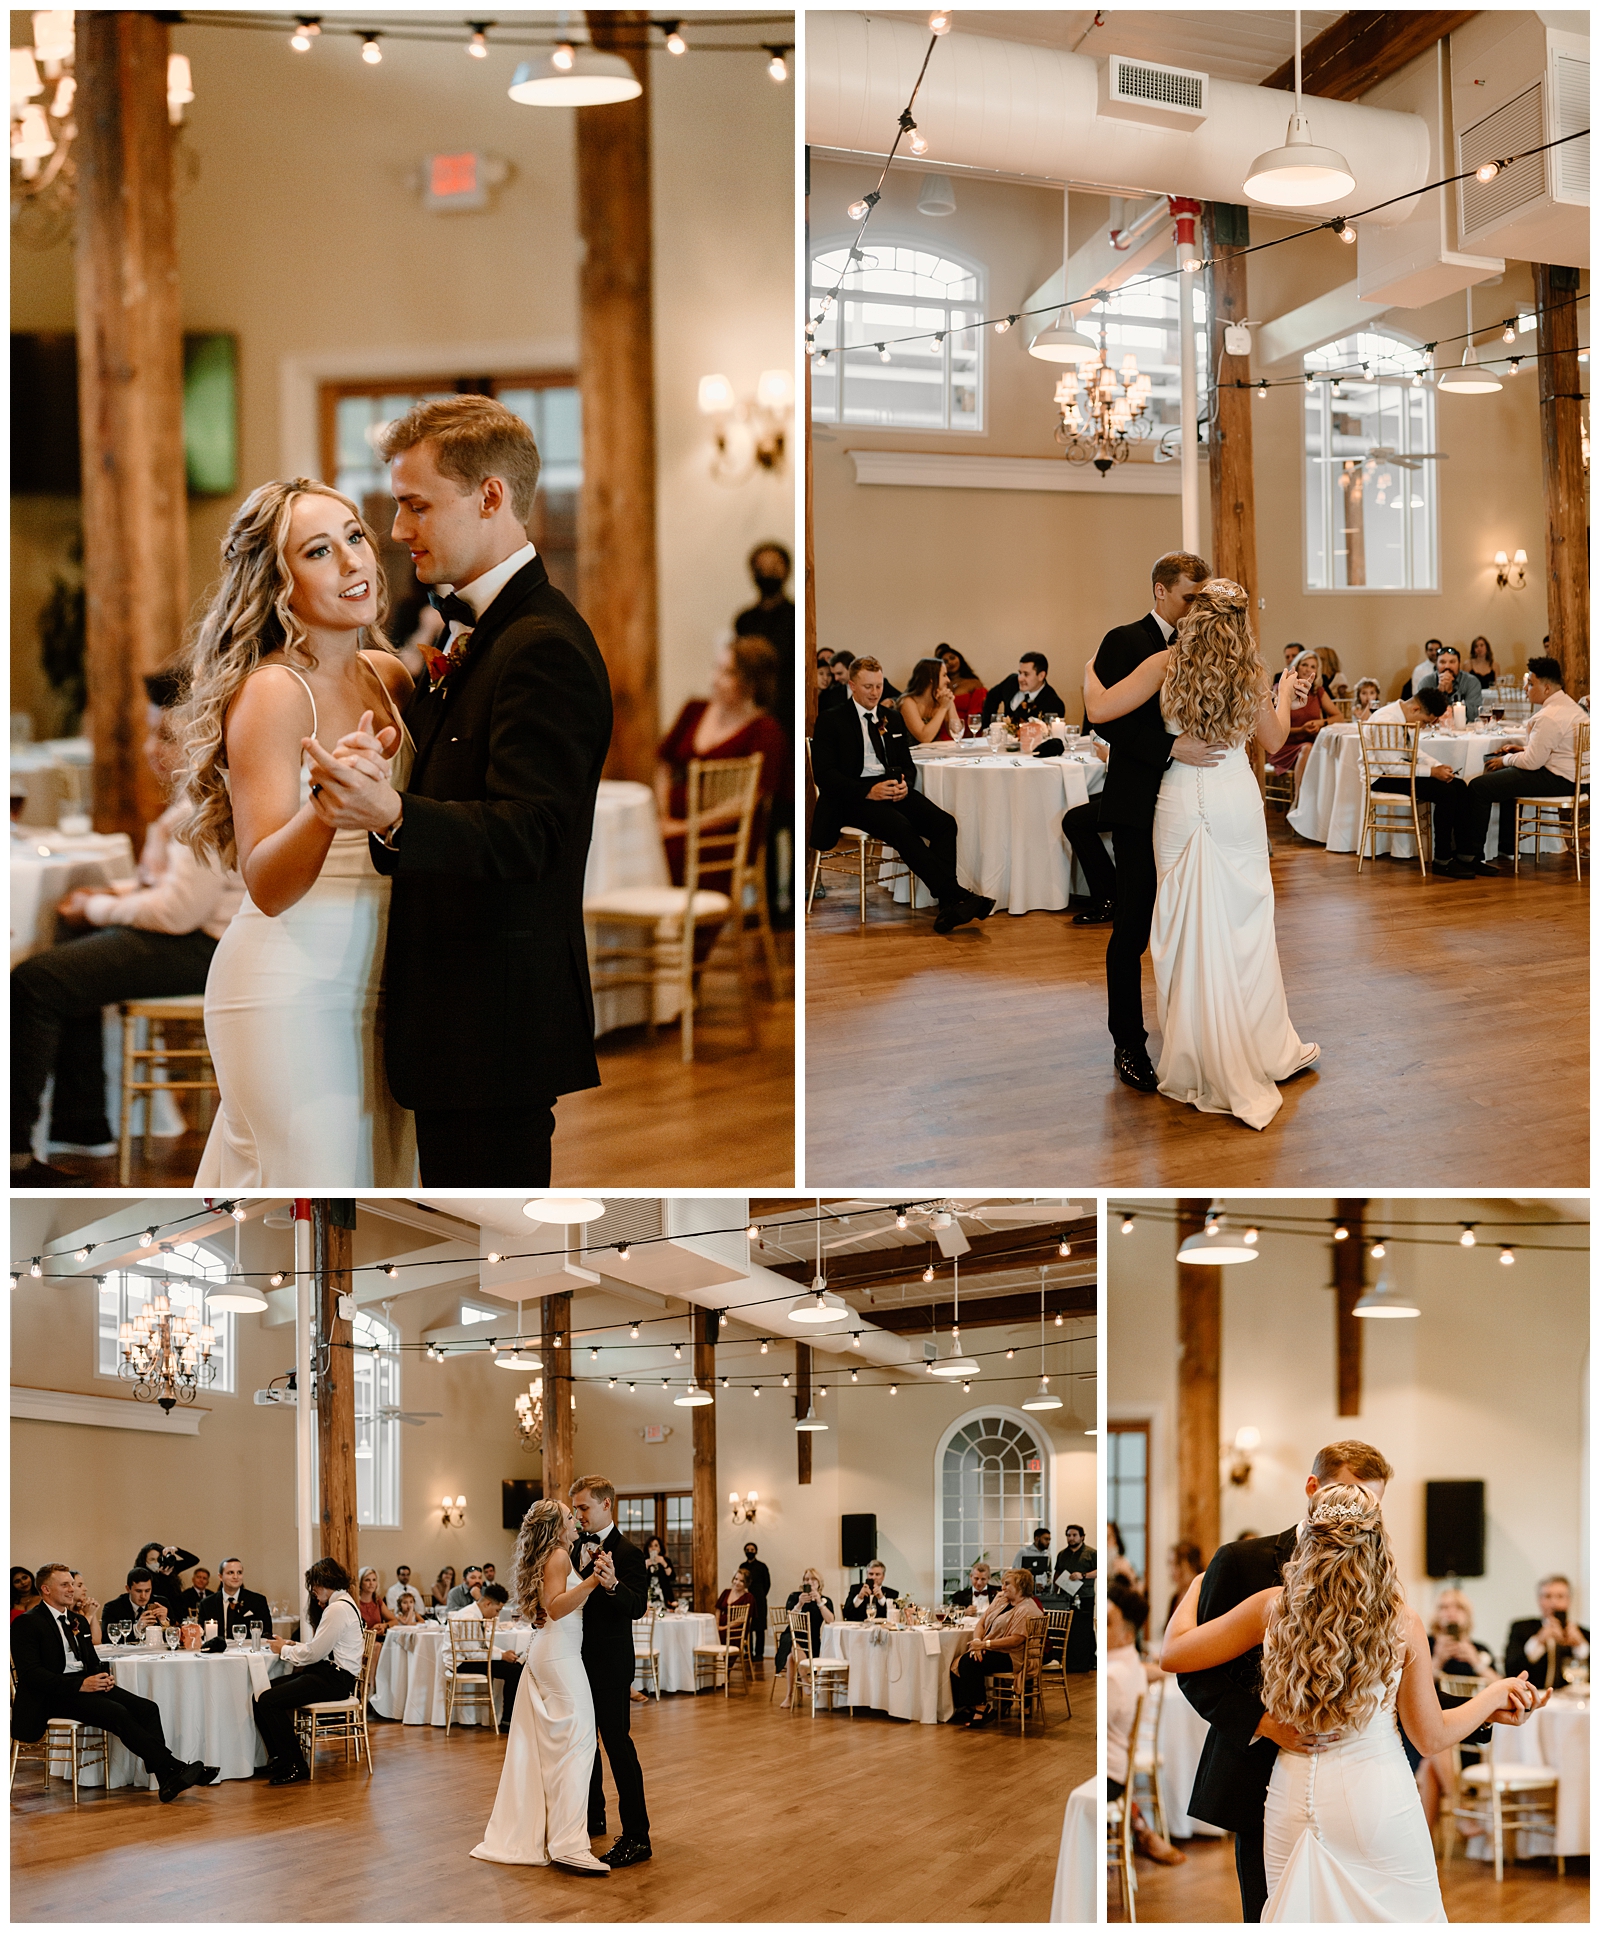 Bride and groom's first dance at Revolution Mill wedding reception in historical Greensboro, NC venue